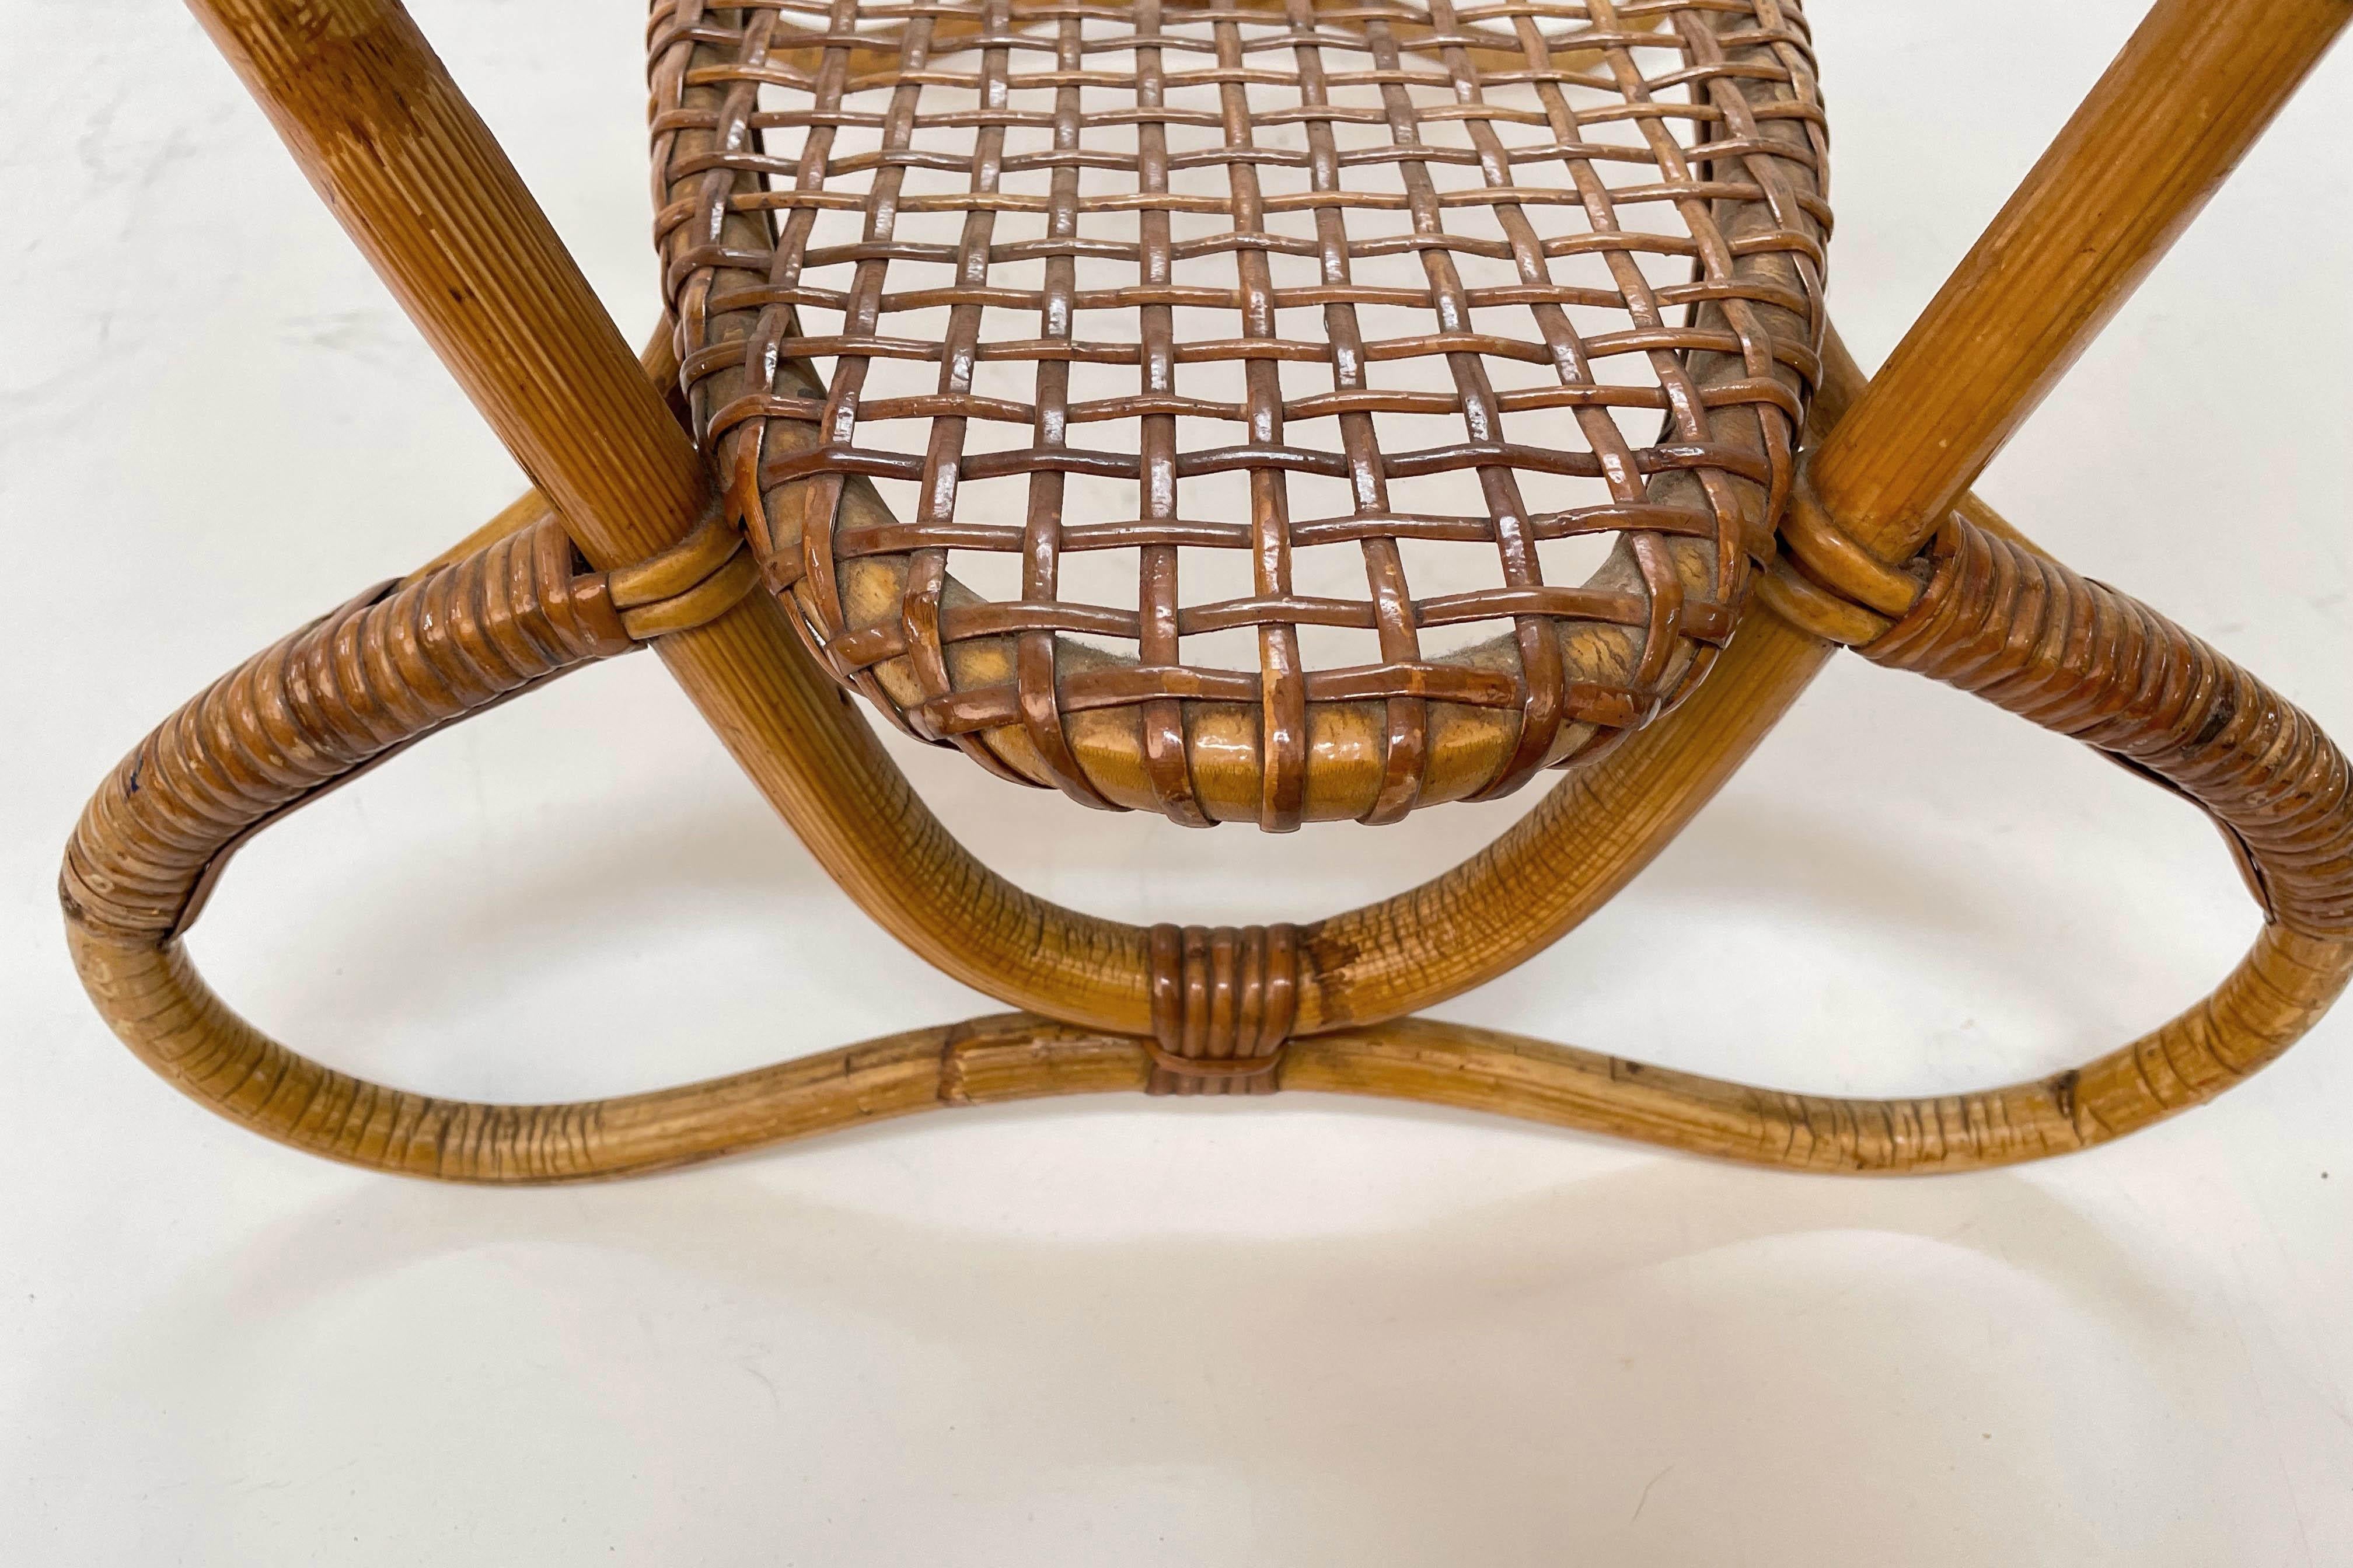 Midcentury Oval Rattan and Bamboo Dutch Coffee Table with Glass Top, 1950s For Sale 8